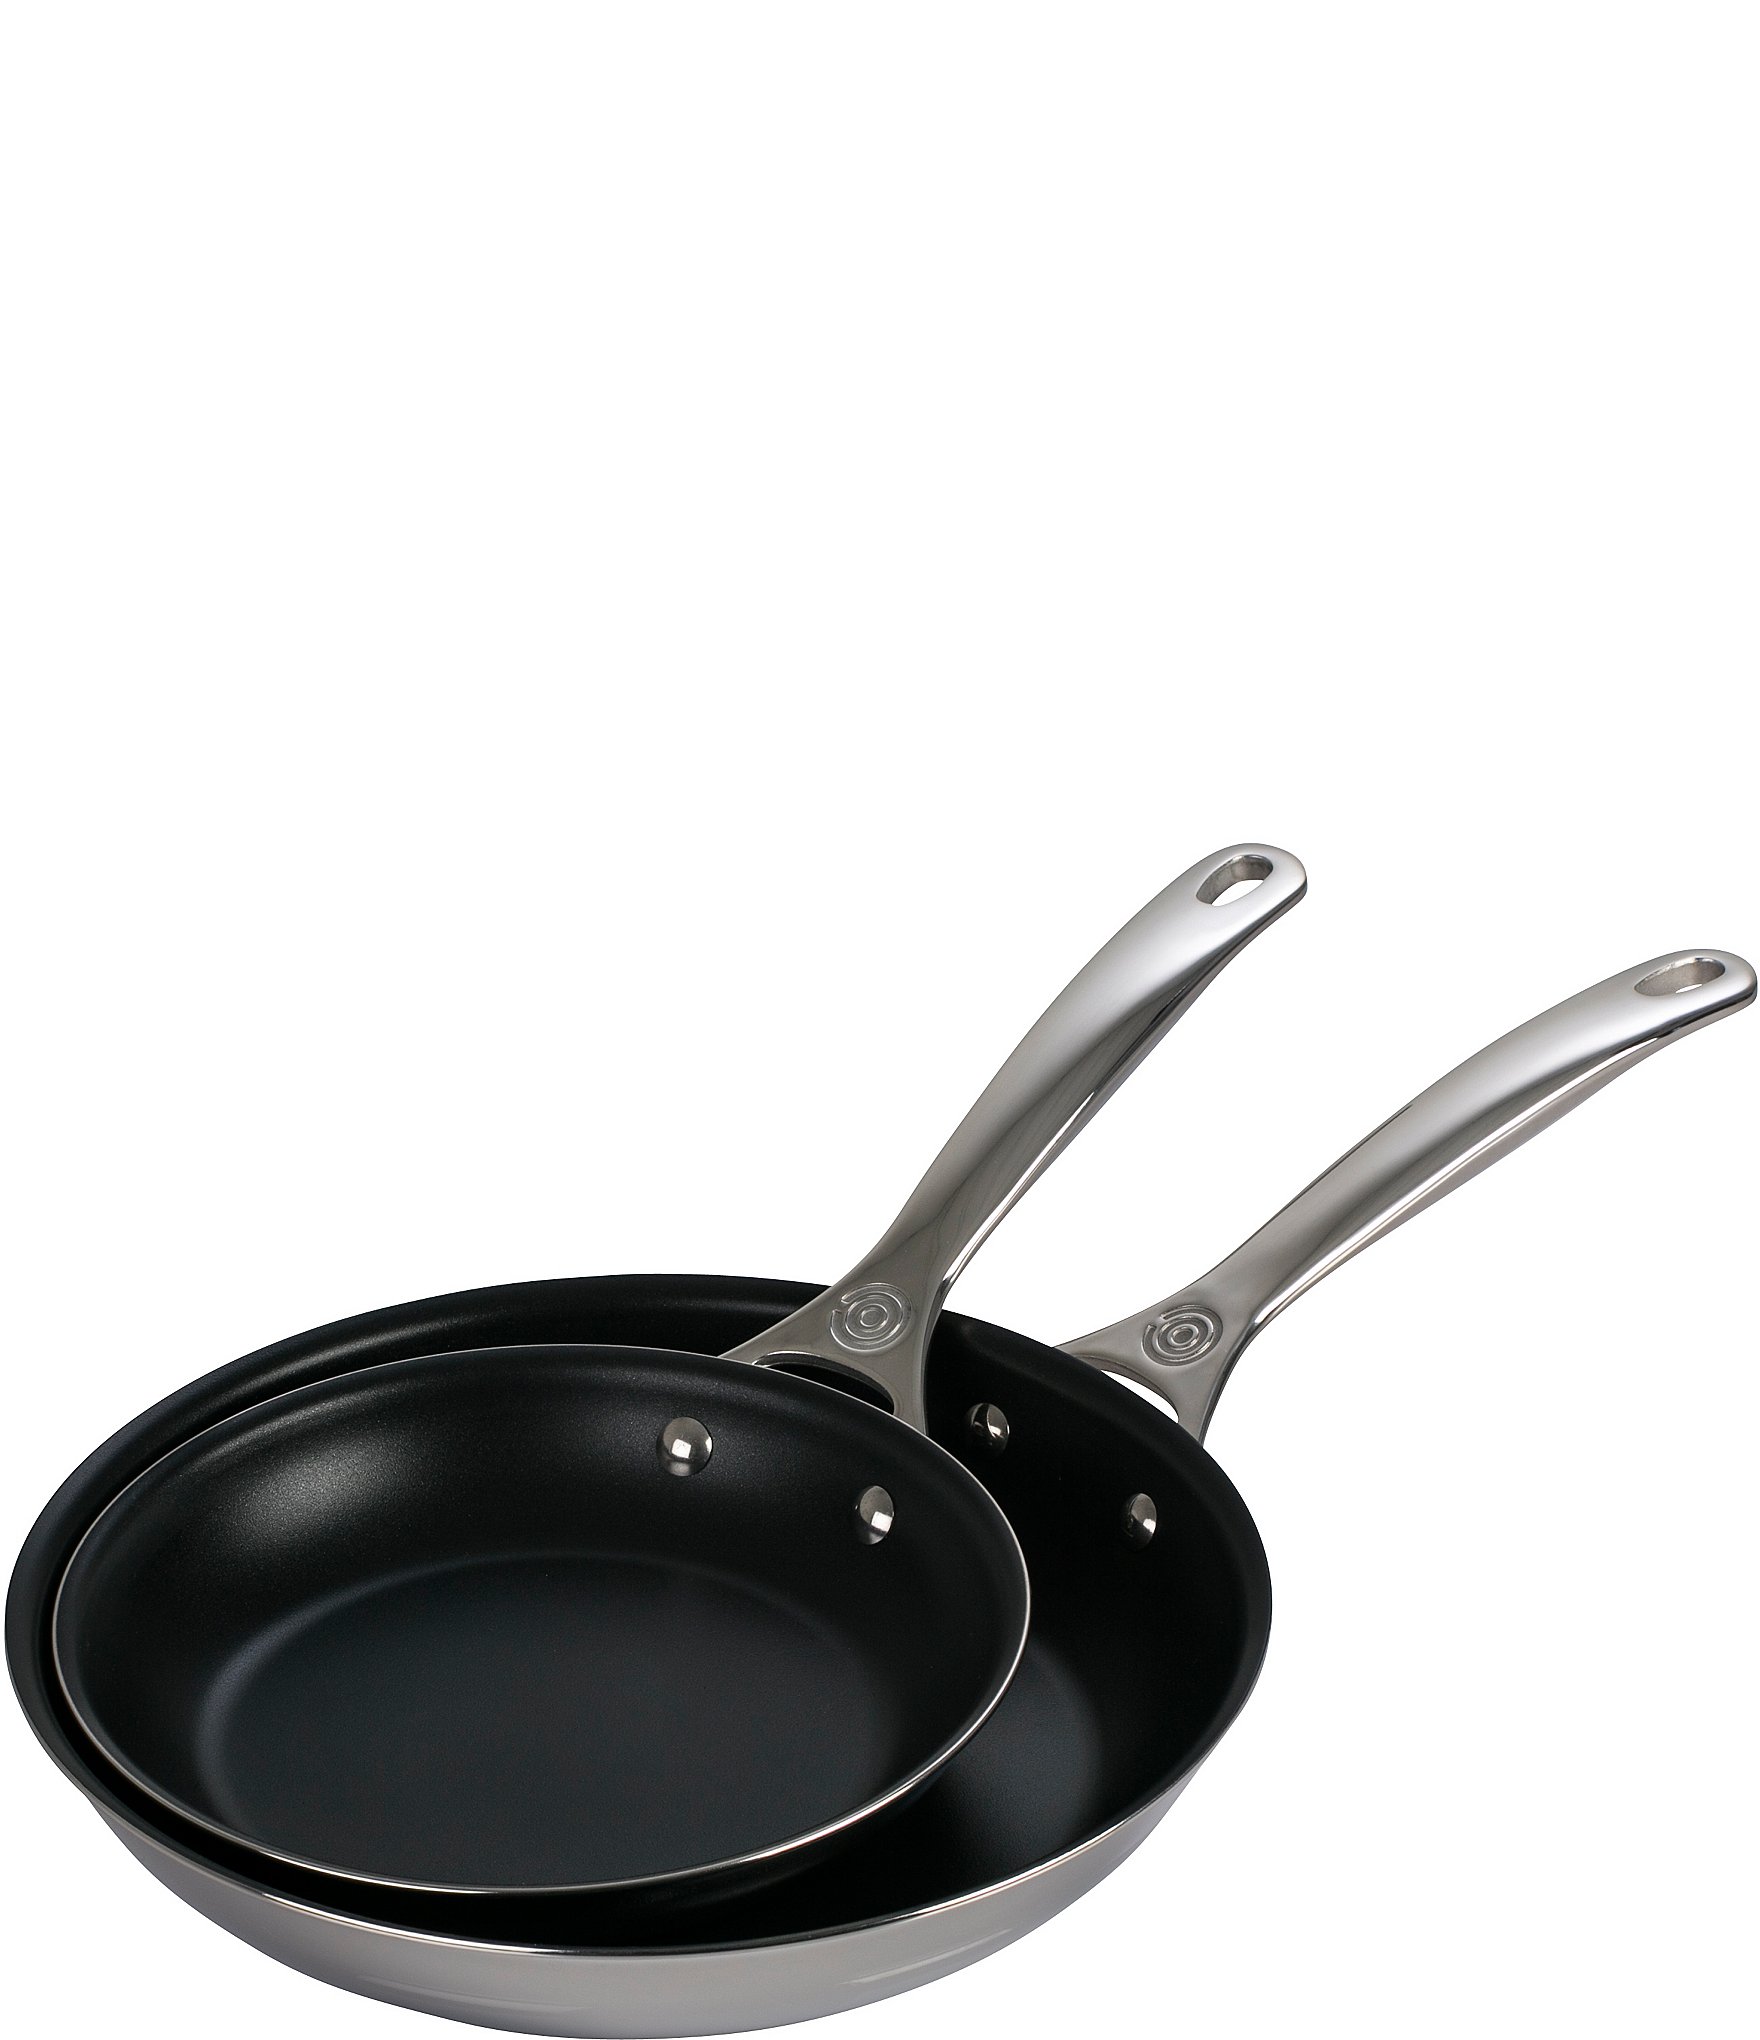  Le Creuset Tri-Ply Stainless Steel 12 Nonstick Fry